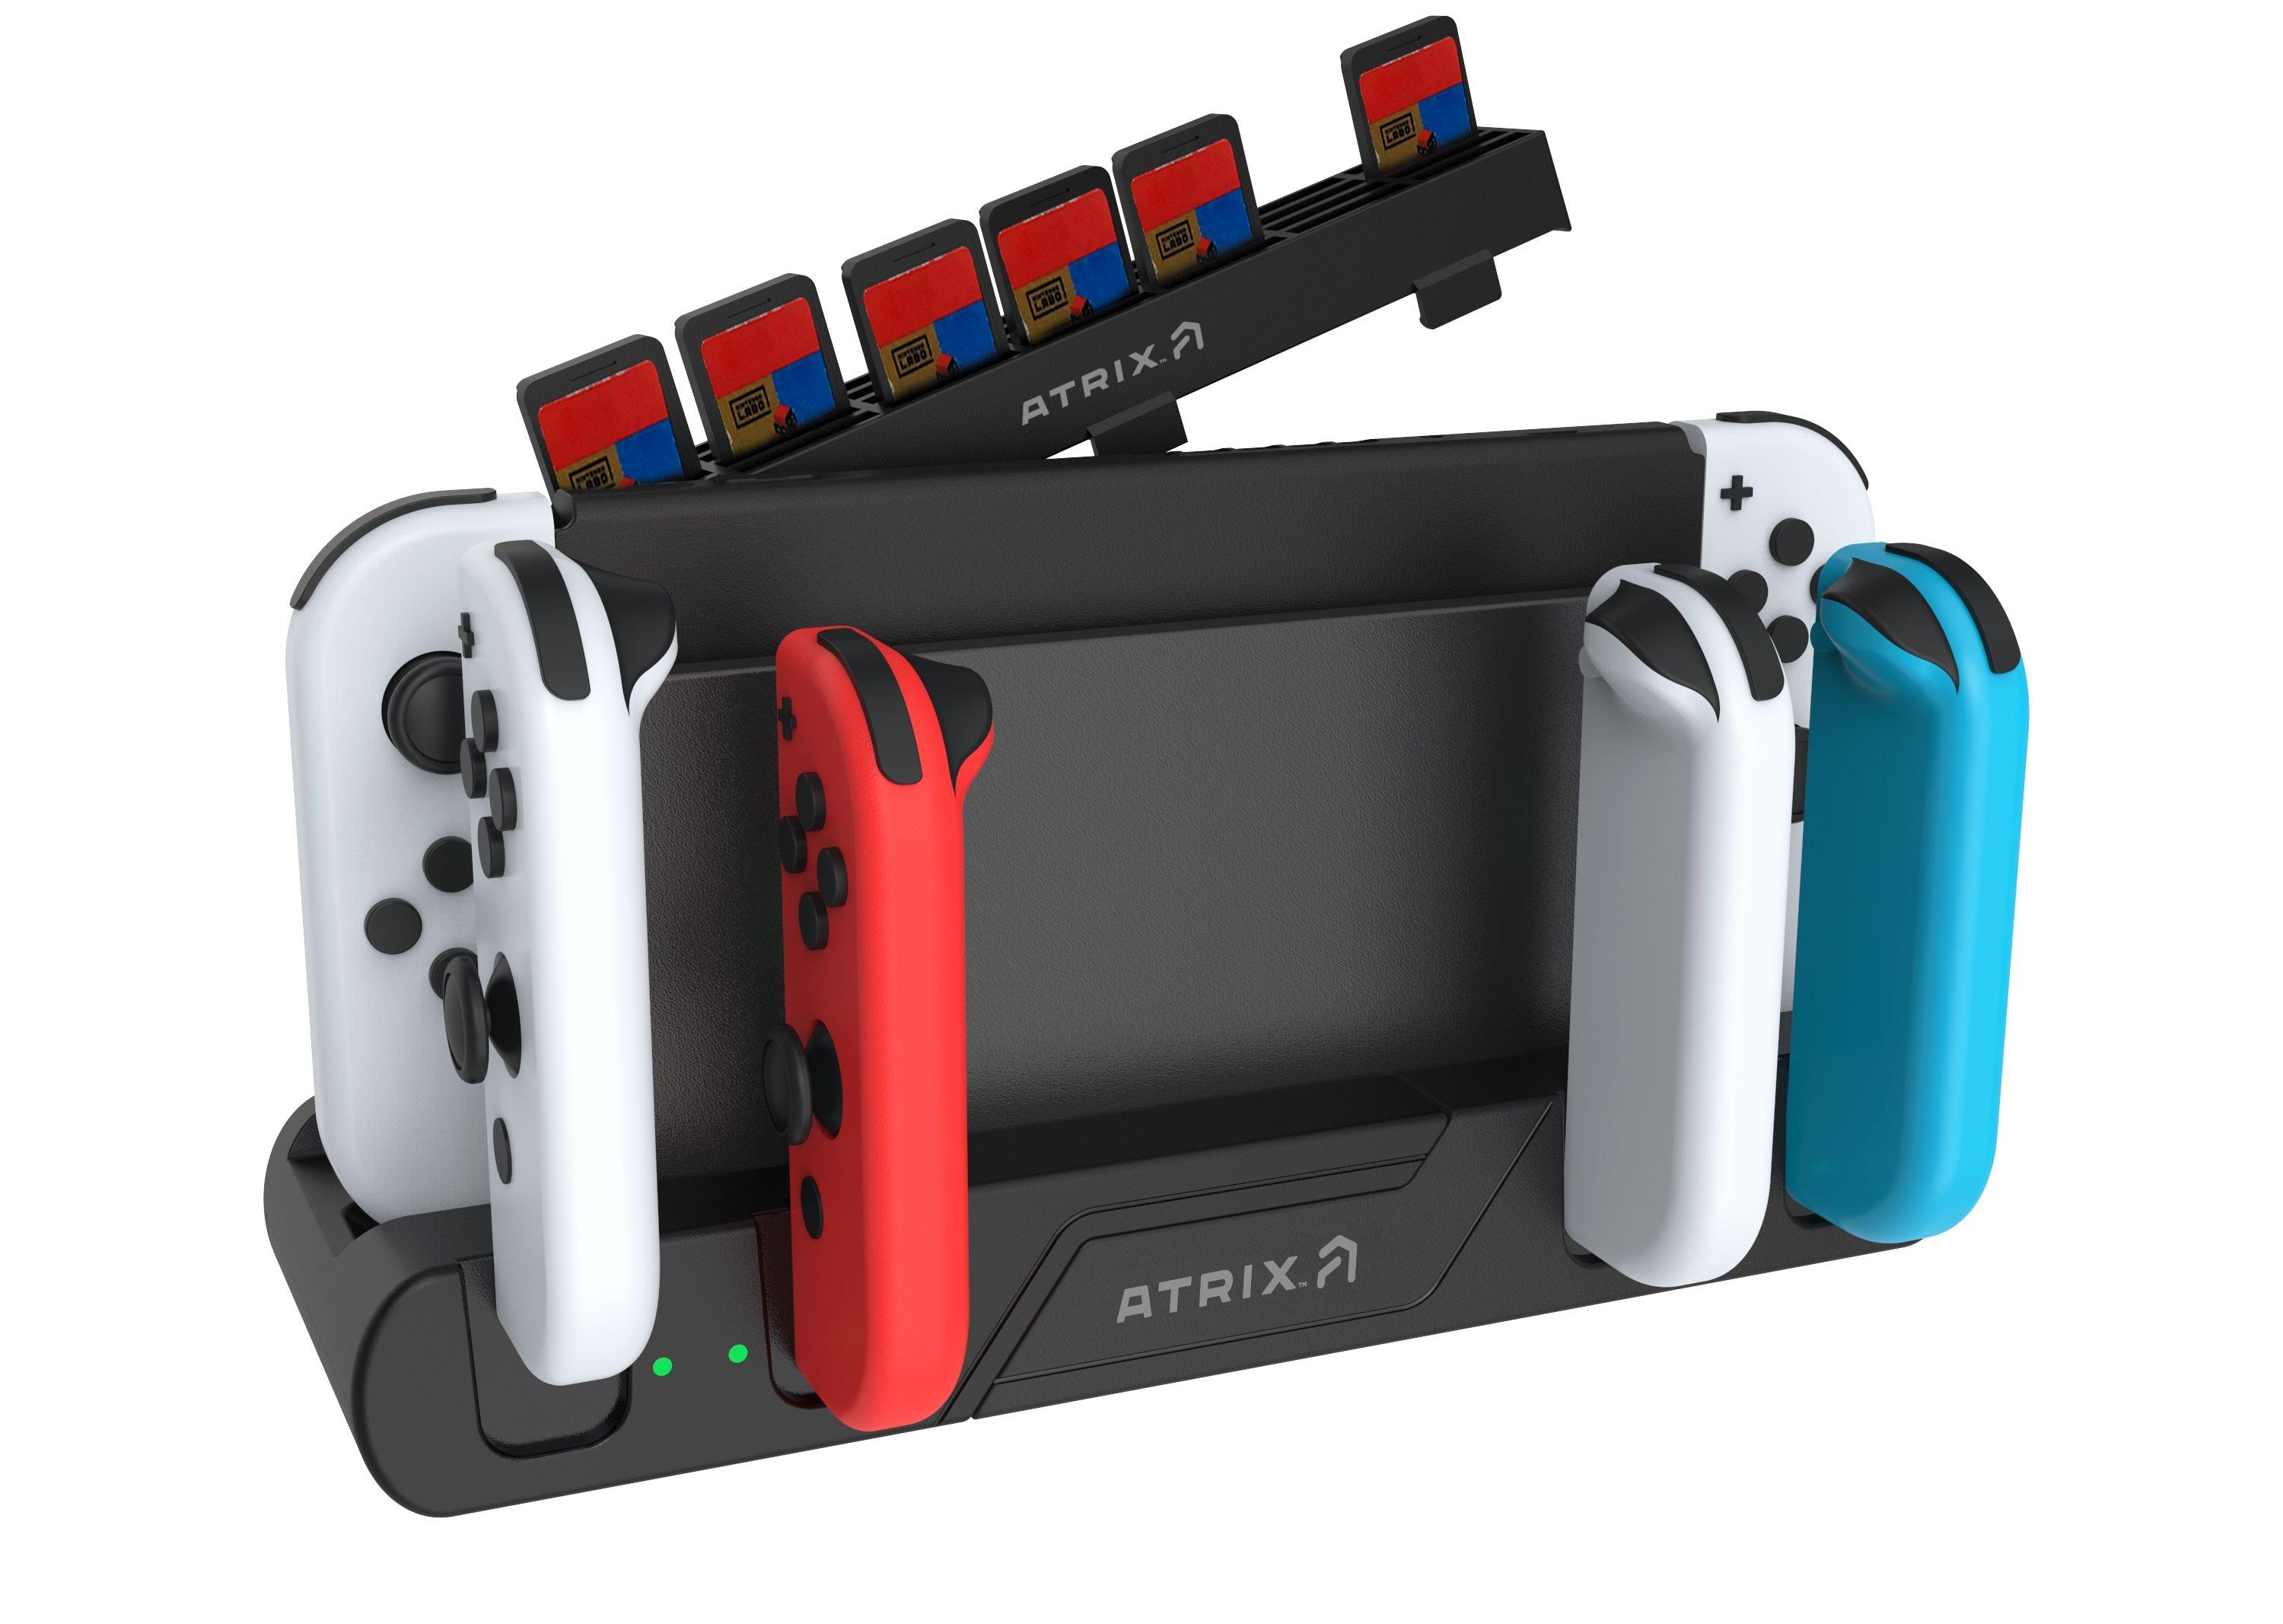 Atrix Nintendo Switch 6-in-1 Controller Charger Dock and Game Deck